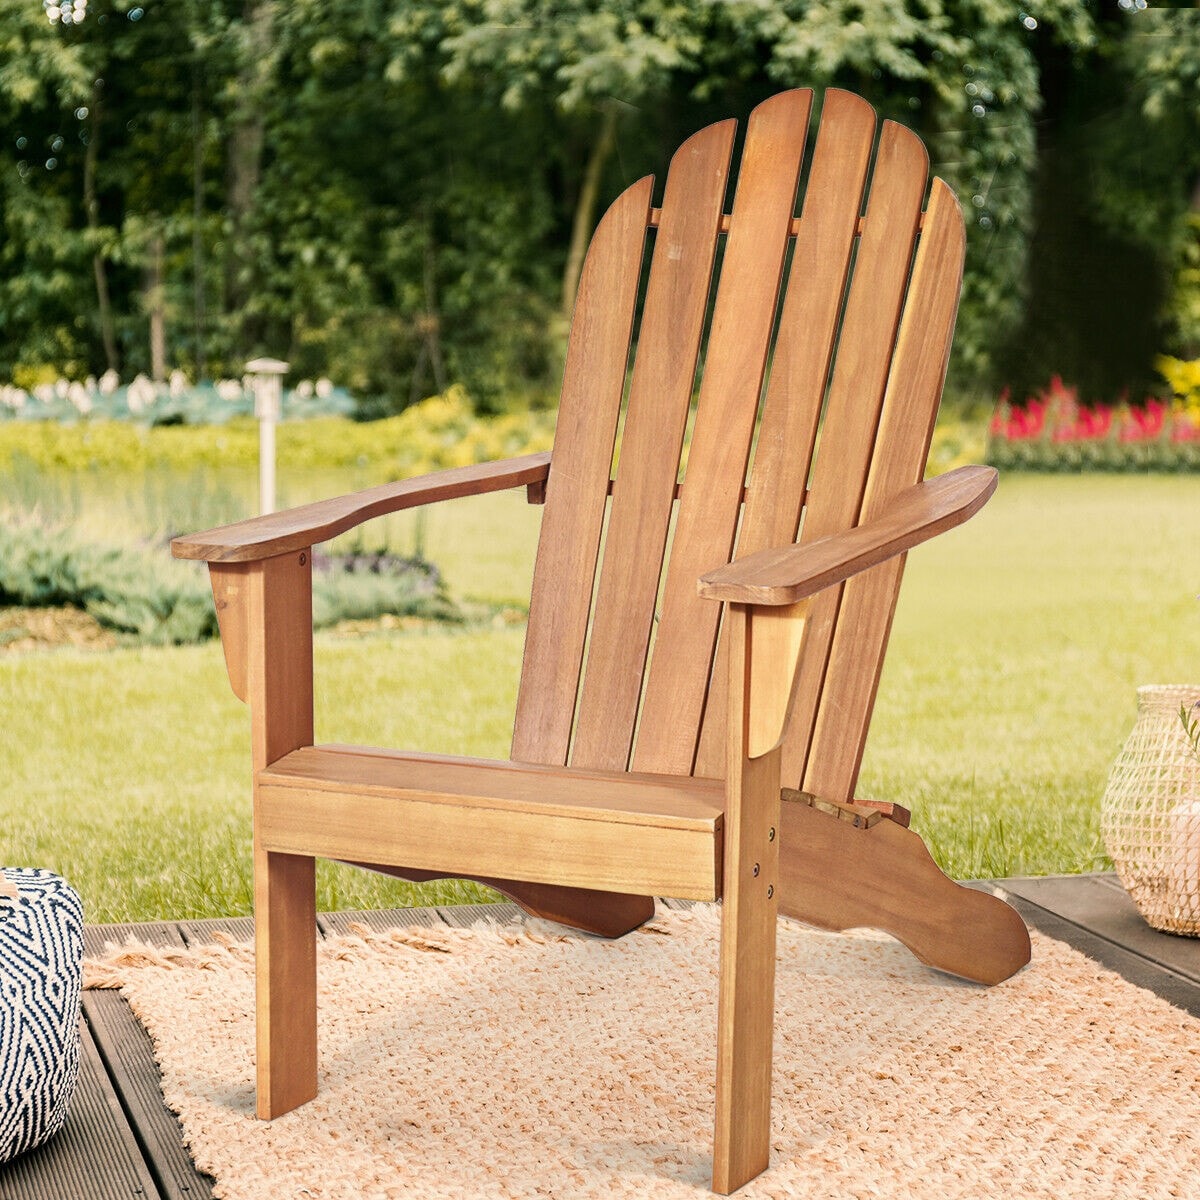 Outdoor Wooden Adirondack Chair Patio Garden Armchairs with Slatted Seat